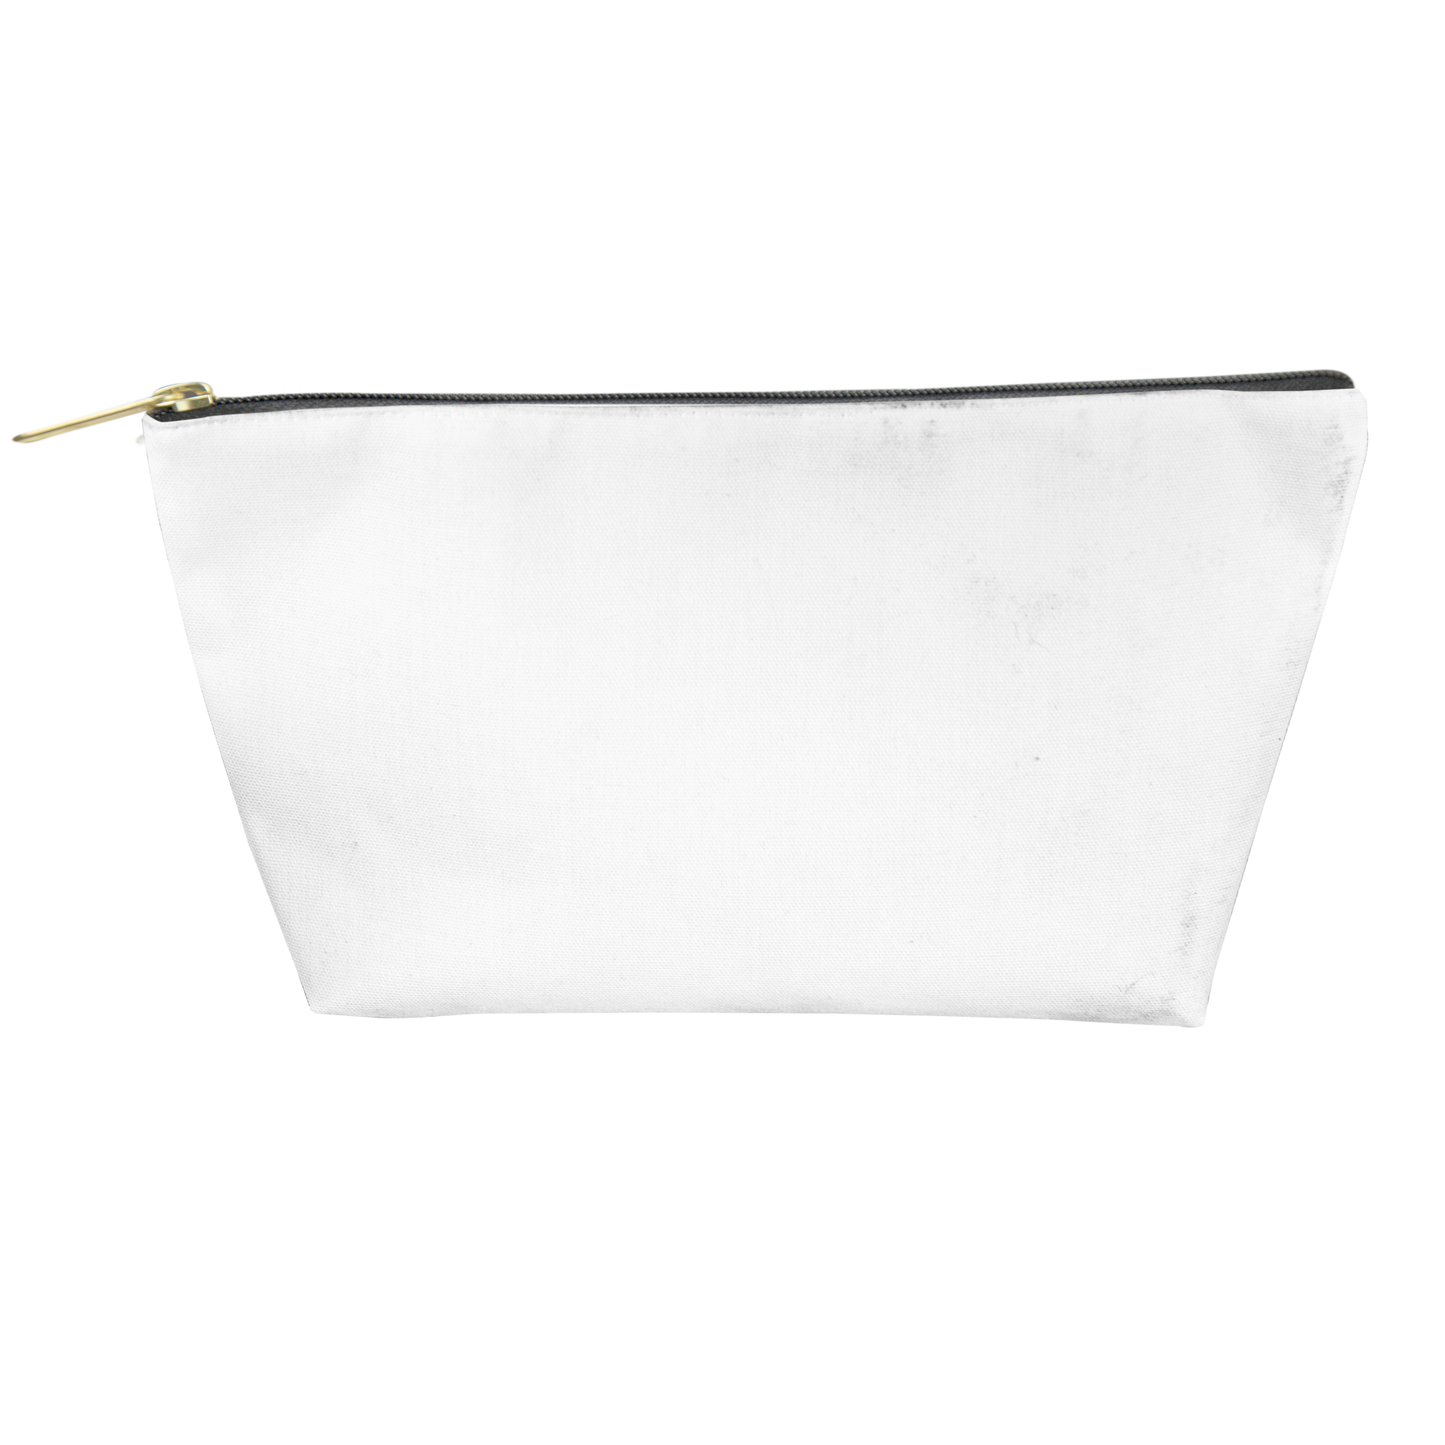 Accessory Pouch - T-Bottom